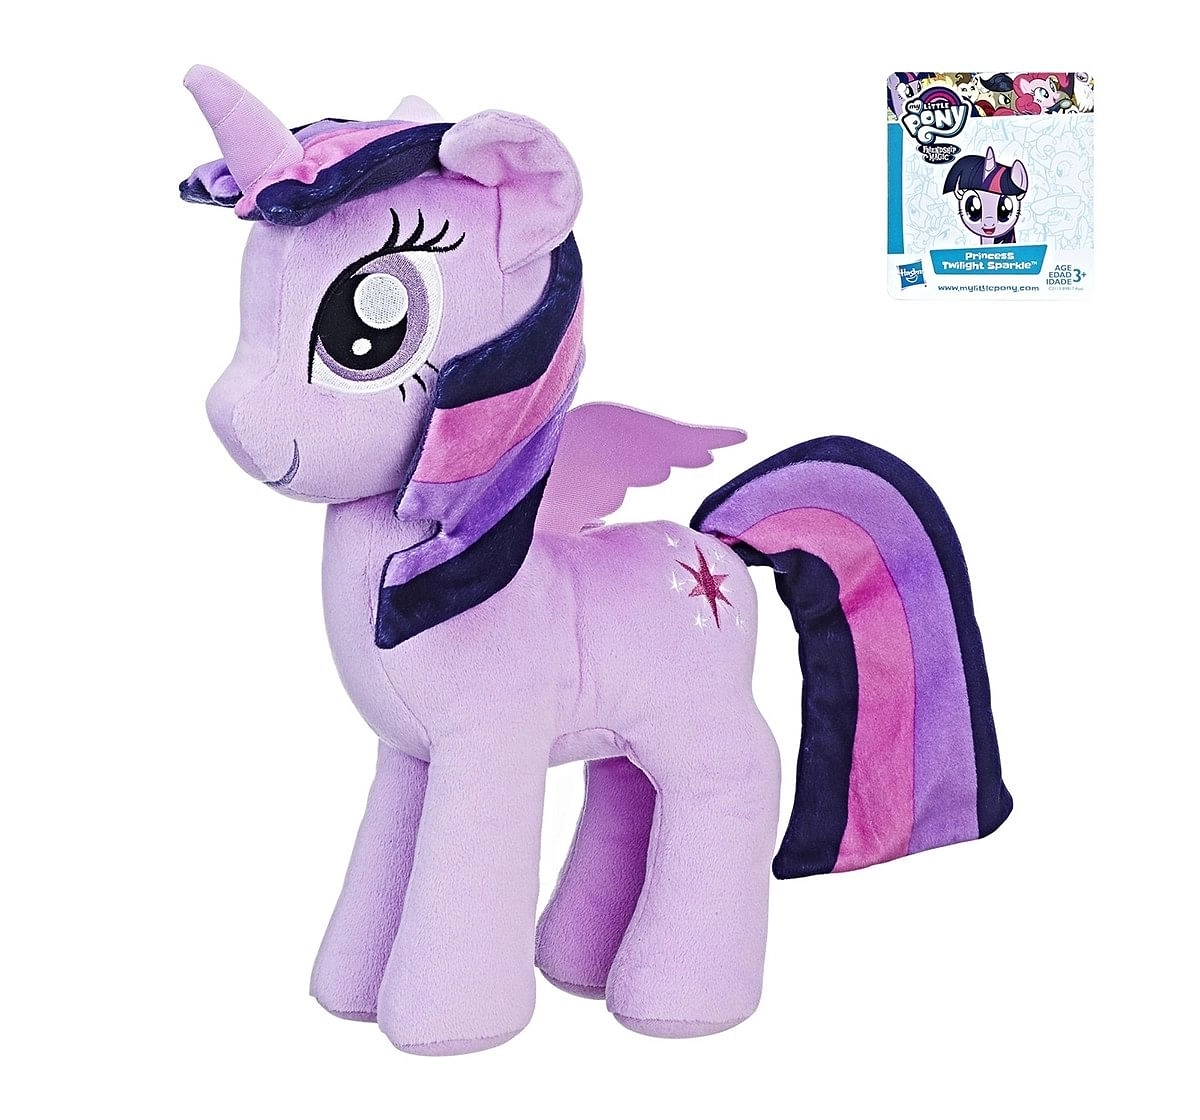  My Little Pony Cuddly Plush Figures Assorted Character Soft Toys for Kids age 3Y+ - 30.48 Cm 